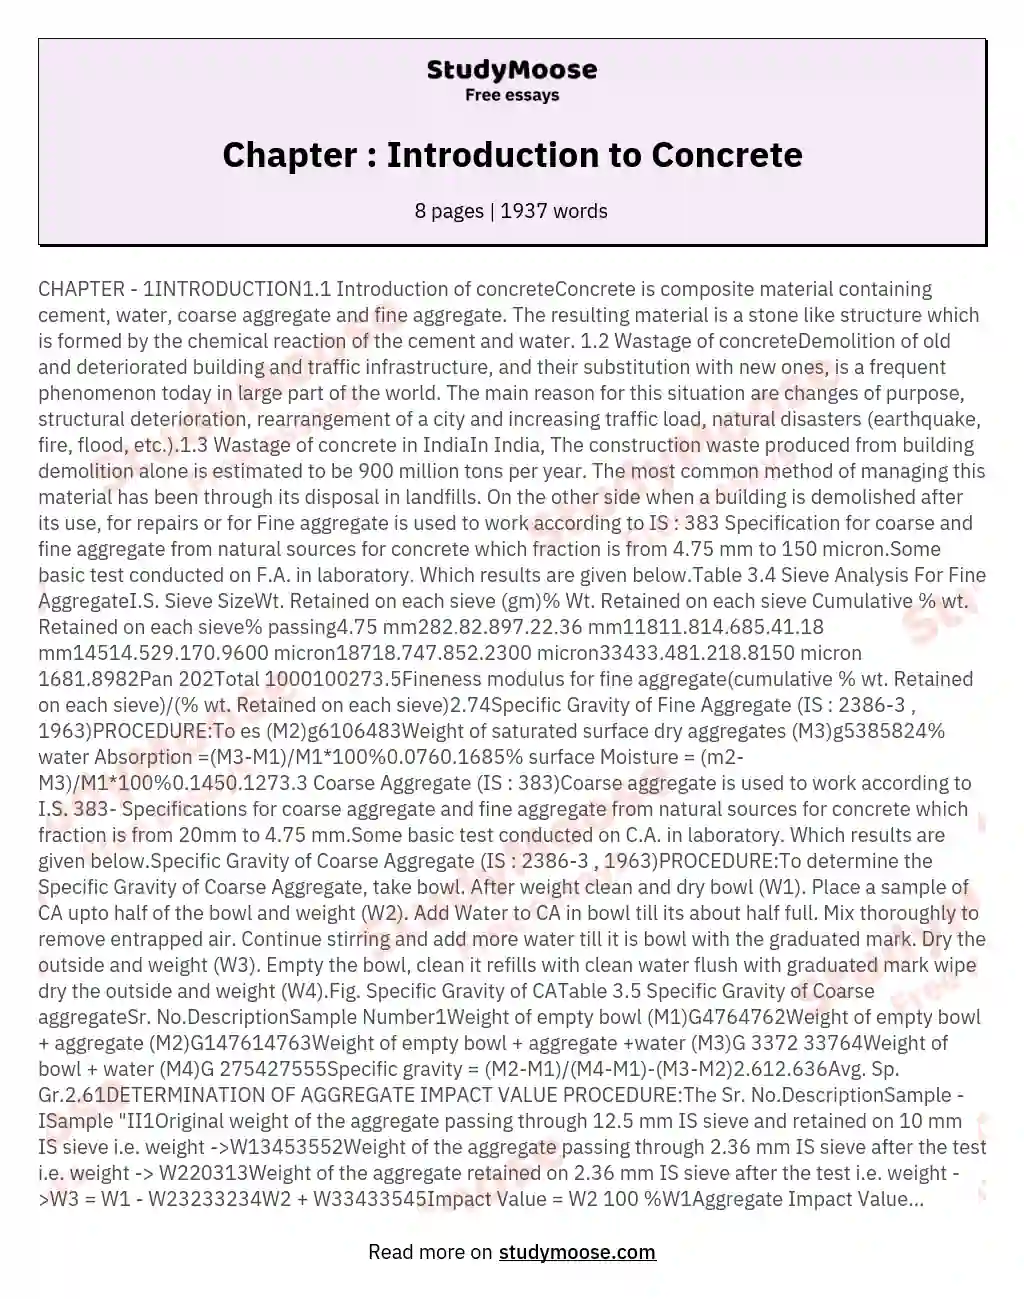 Chapter : Introduction to Concrete